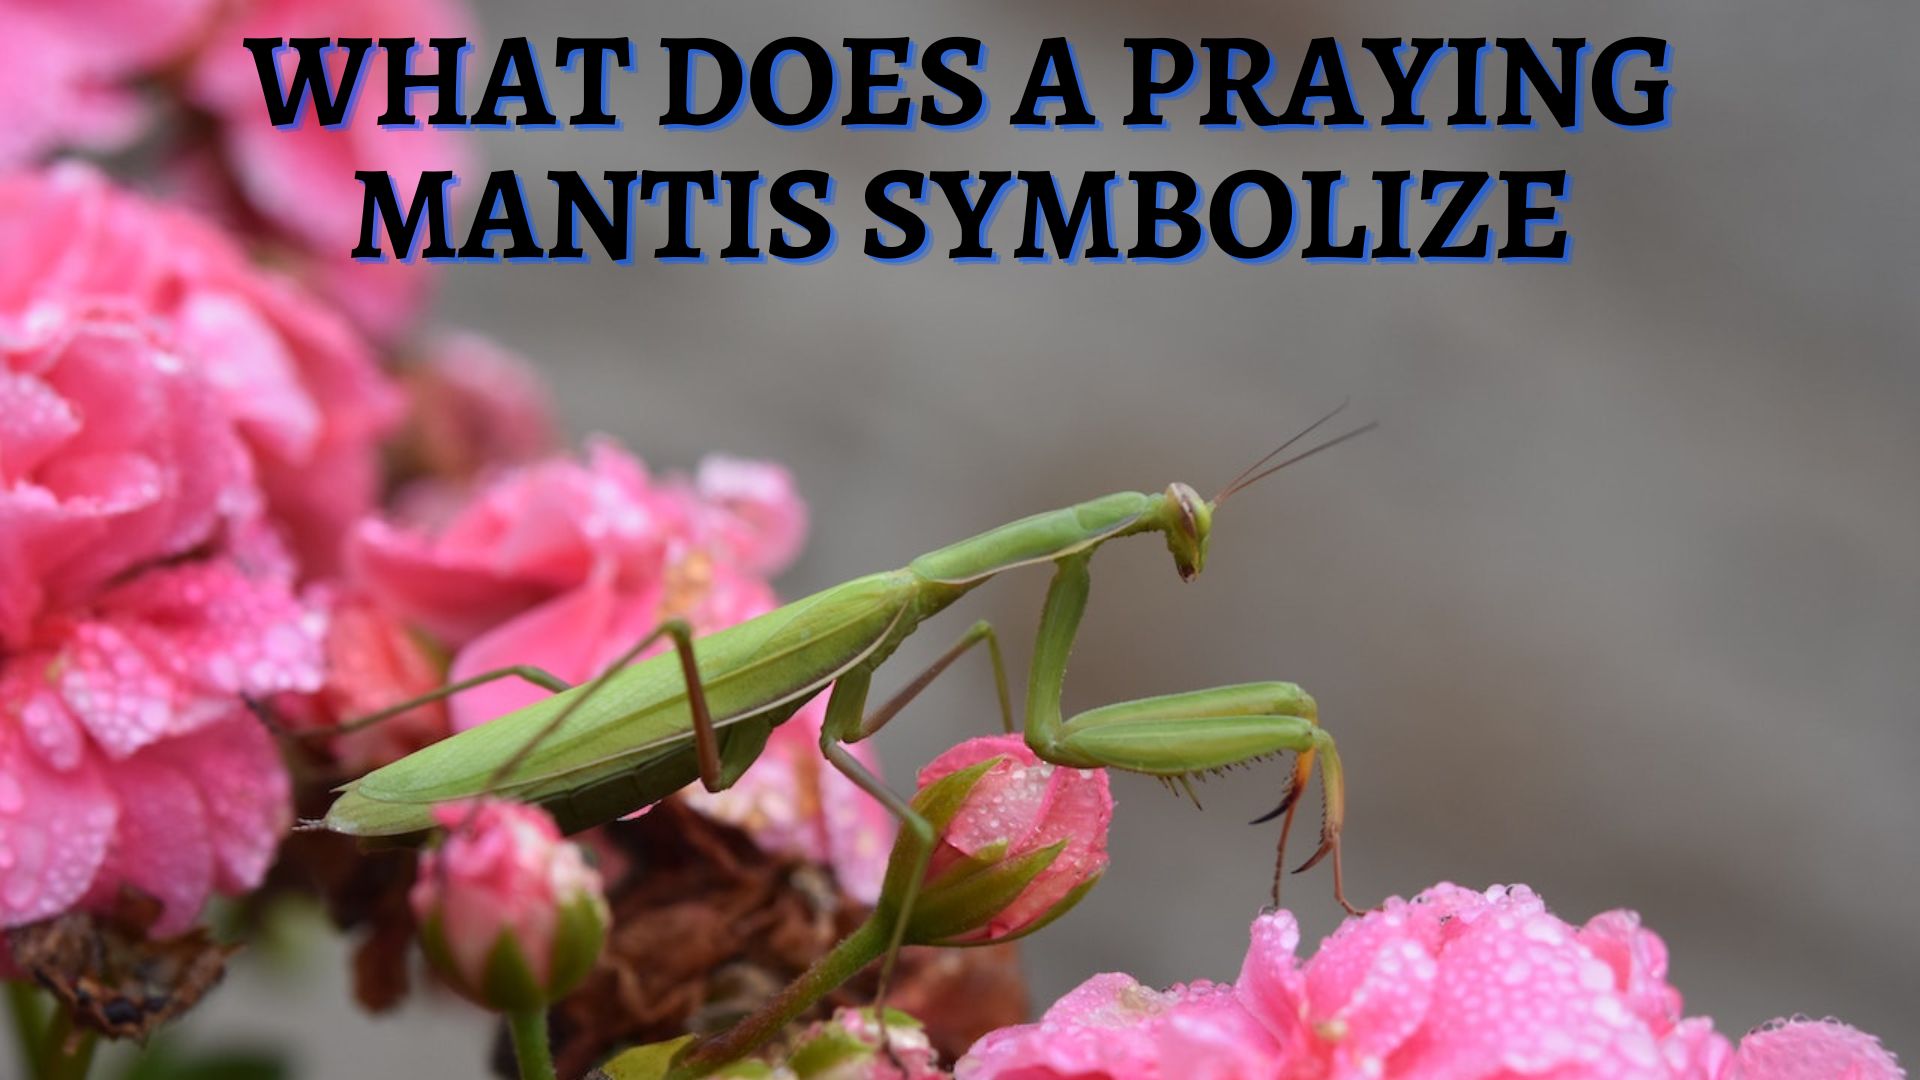 What Does A Praying Mantis Symbolize?